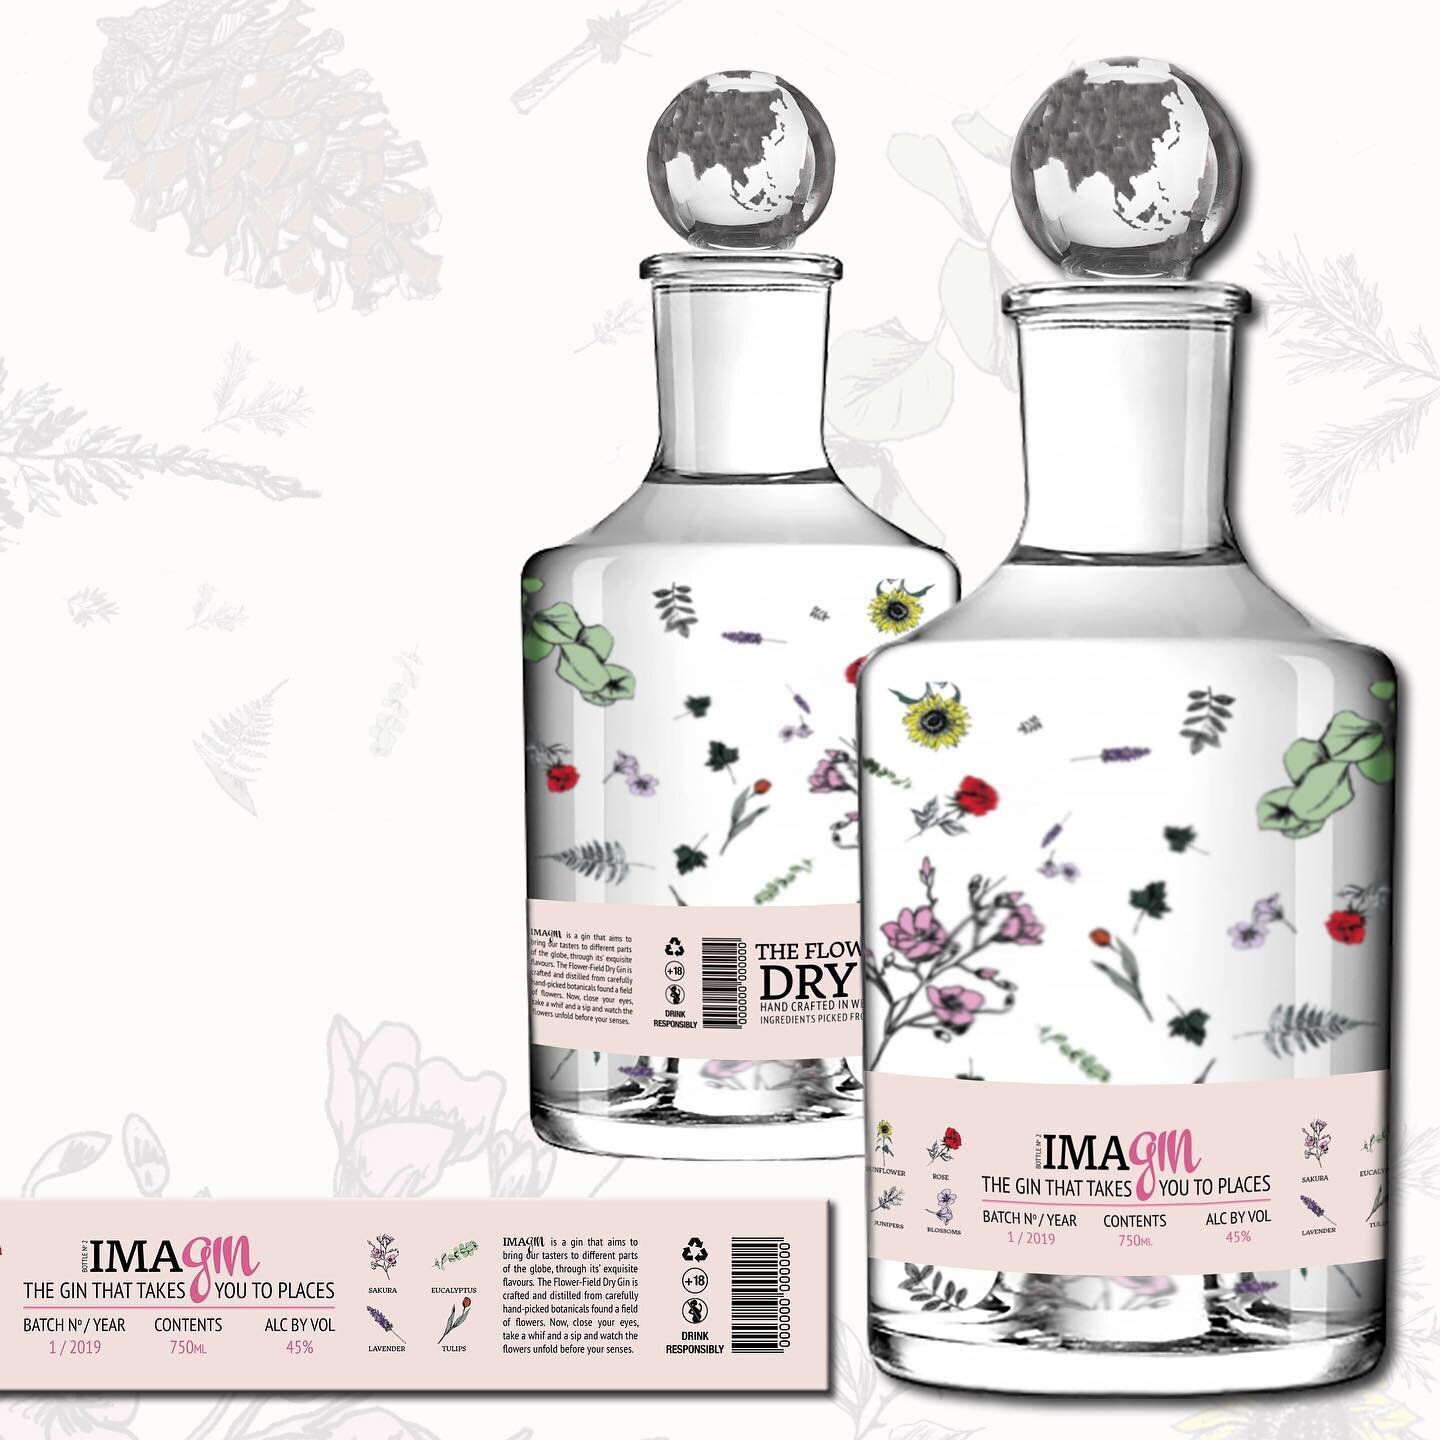 ImaGin. 
The Gin that takes you to places! 🥃🌍 Featuring The Flower-Field Dry Gin that is crafted and distilled from hand-picked botanicals found in flower fields. 
Take a whiff, a sip, and close your eyes... as the flowers unfold before your senses